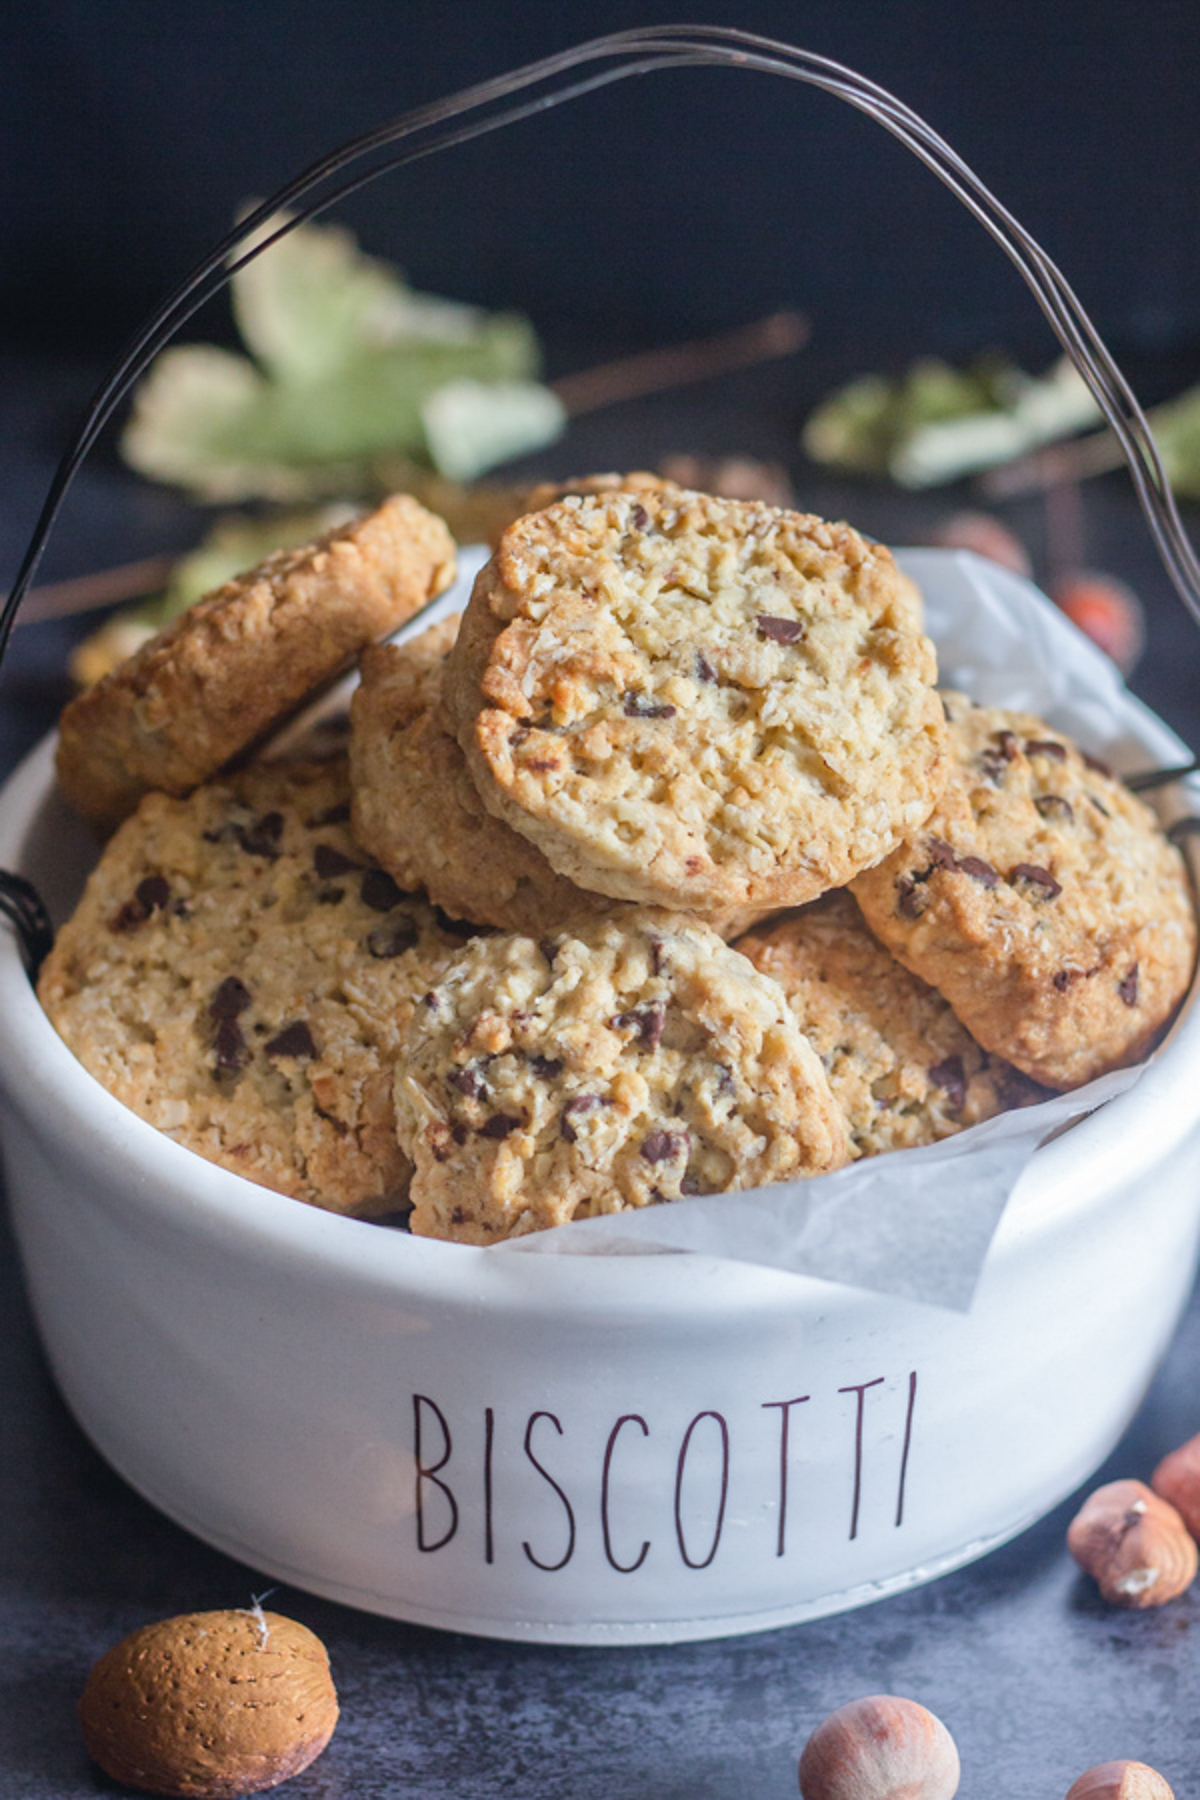 Oatmeal cookies in a white biscotti bowl.